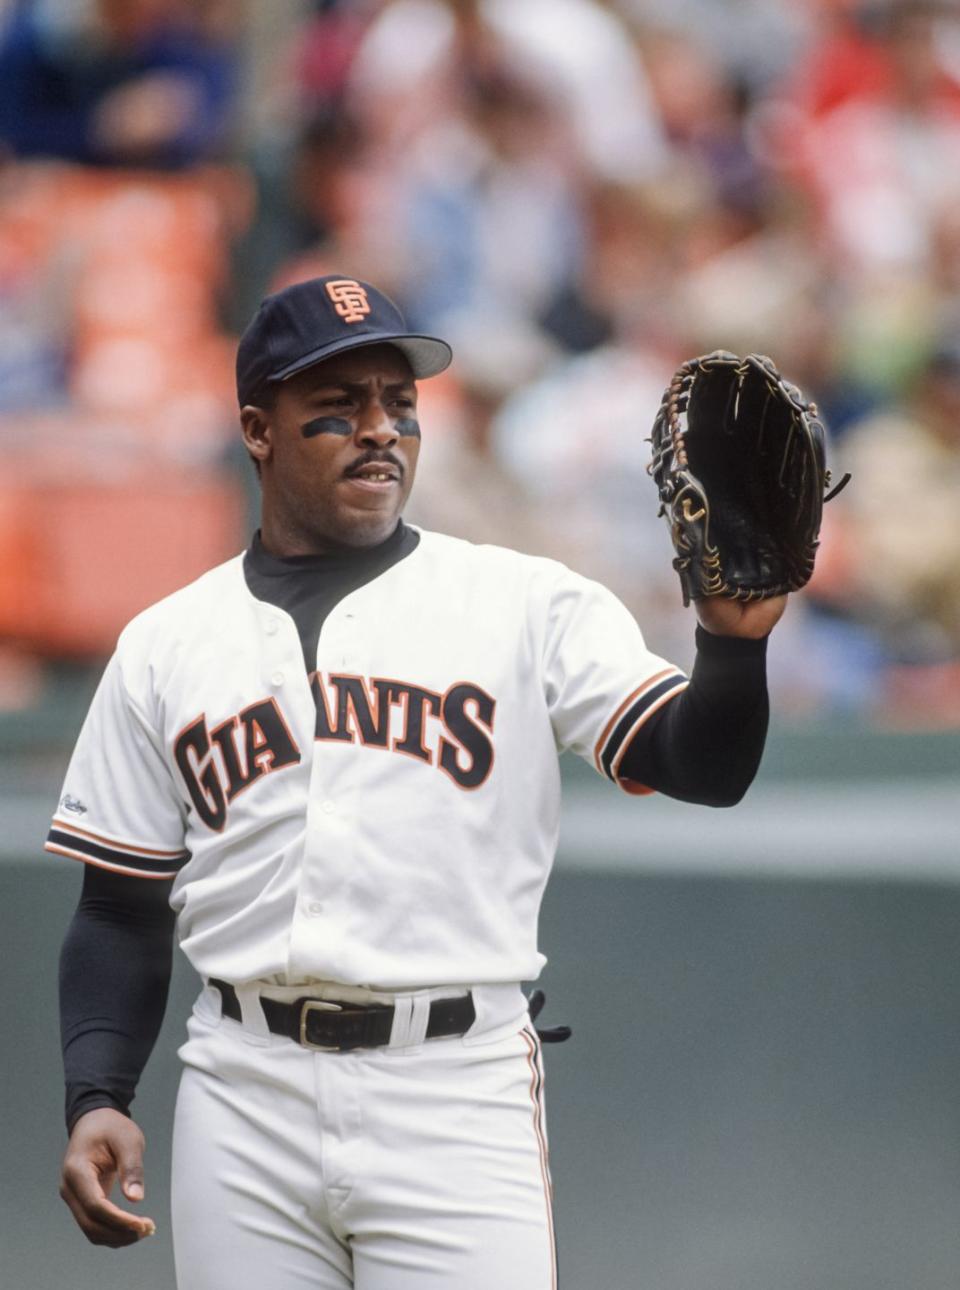 <p><strong>April 26, 1989</strong>: Kevin Mitchell was a talented baseball player with a gift for the unexpected. It all came together for "Mitch" in 1989, when he was named National League MVP—and made one of the wildest catches in baseball history.<br><br>Here's the scene: Mitchell's in left field at Busch Stadium when the Cardinals' Ozzie Smith hits a tailing fly ball toward the left-field line. Mitchell runs hard—too hard, in fact. He overruns the fly ball, realizes it, and reaches back with his right hand—the one without a glove—to make a crazy, over-the-head catch.<br><br>Mitchell's explanation: "I was running as hard as I could, and it just came back on me. All I could do was stick up my hand and there it was."<br> </p>